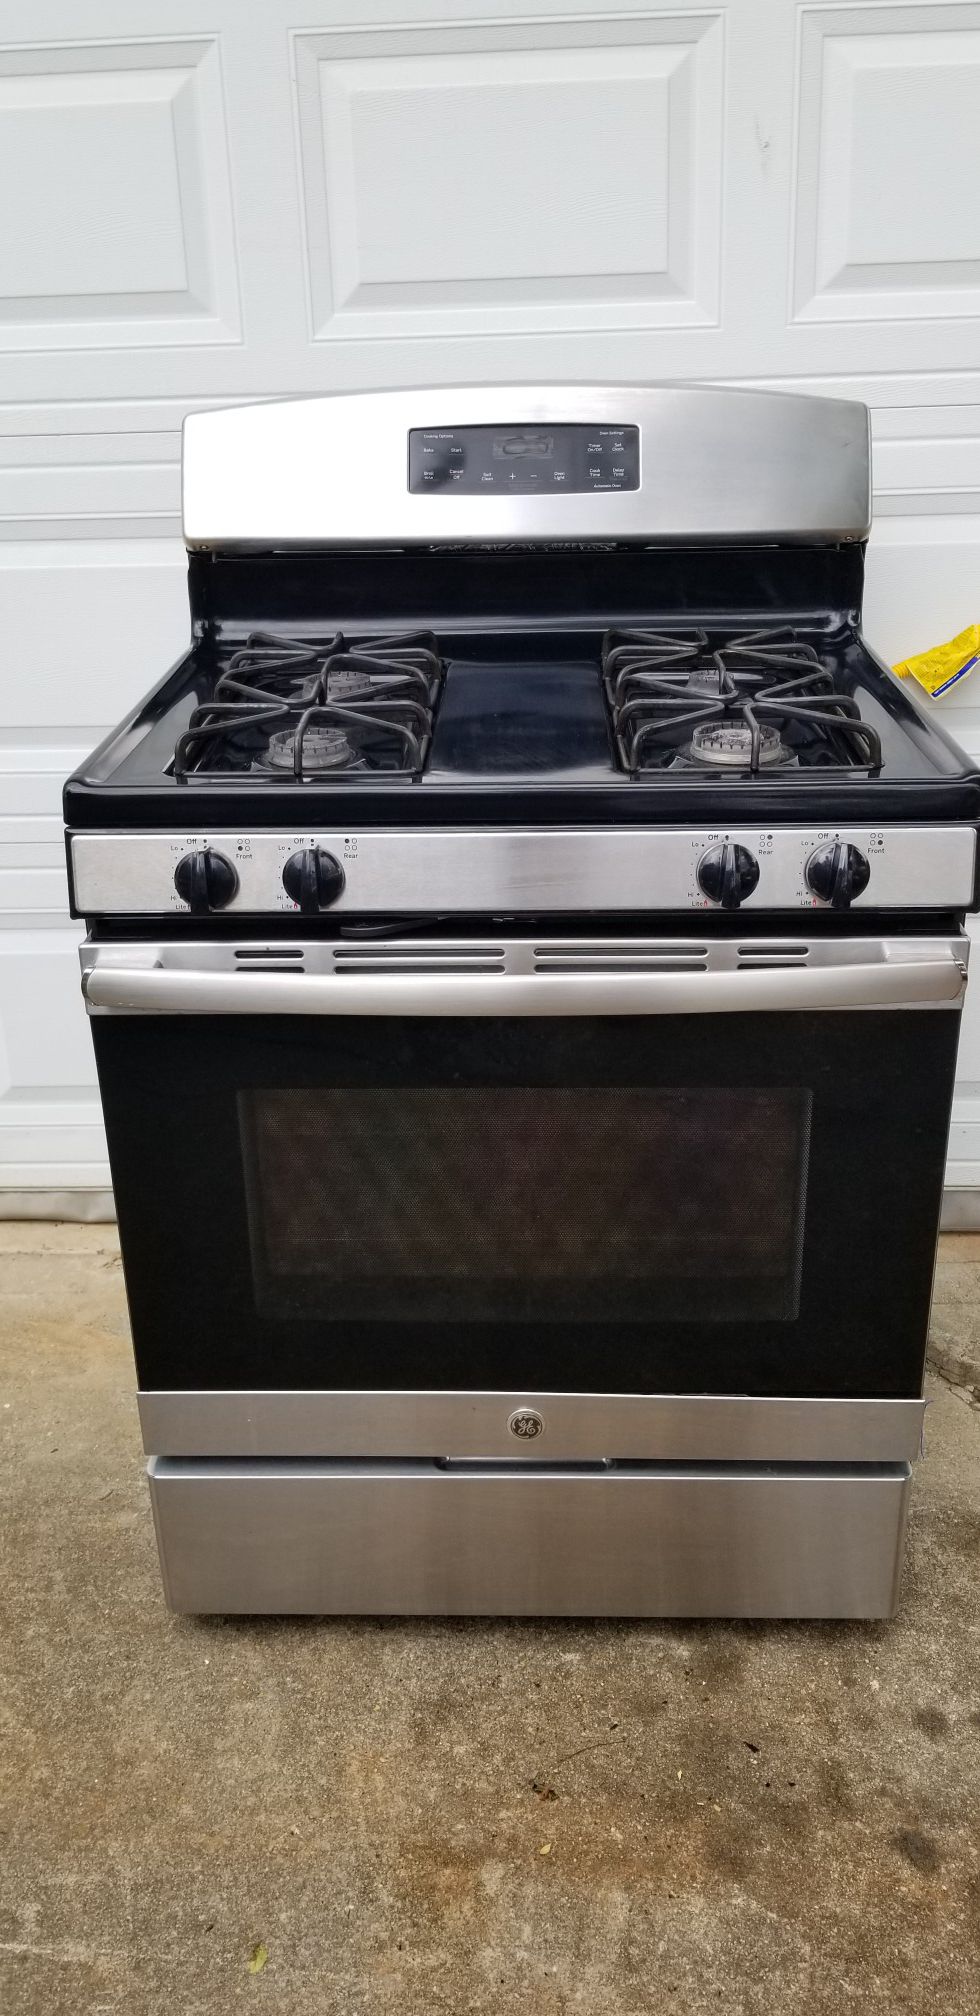 GE JGB635 Gas Range with Self-Cleaning Oven in Stainless Steel 30 in. 5.0 cu. ft.